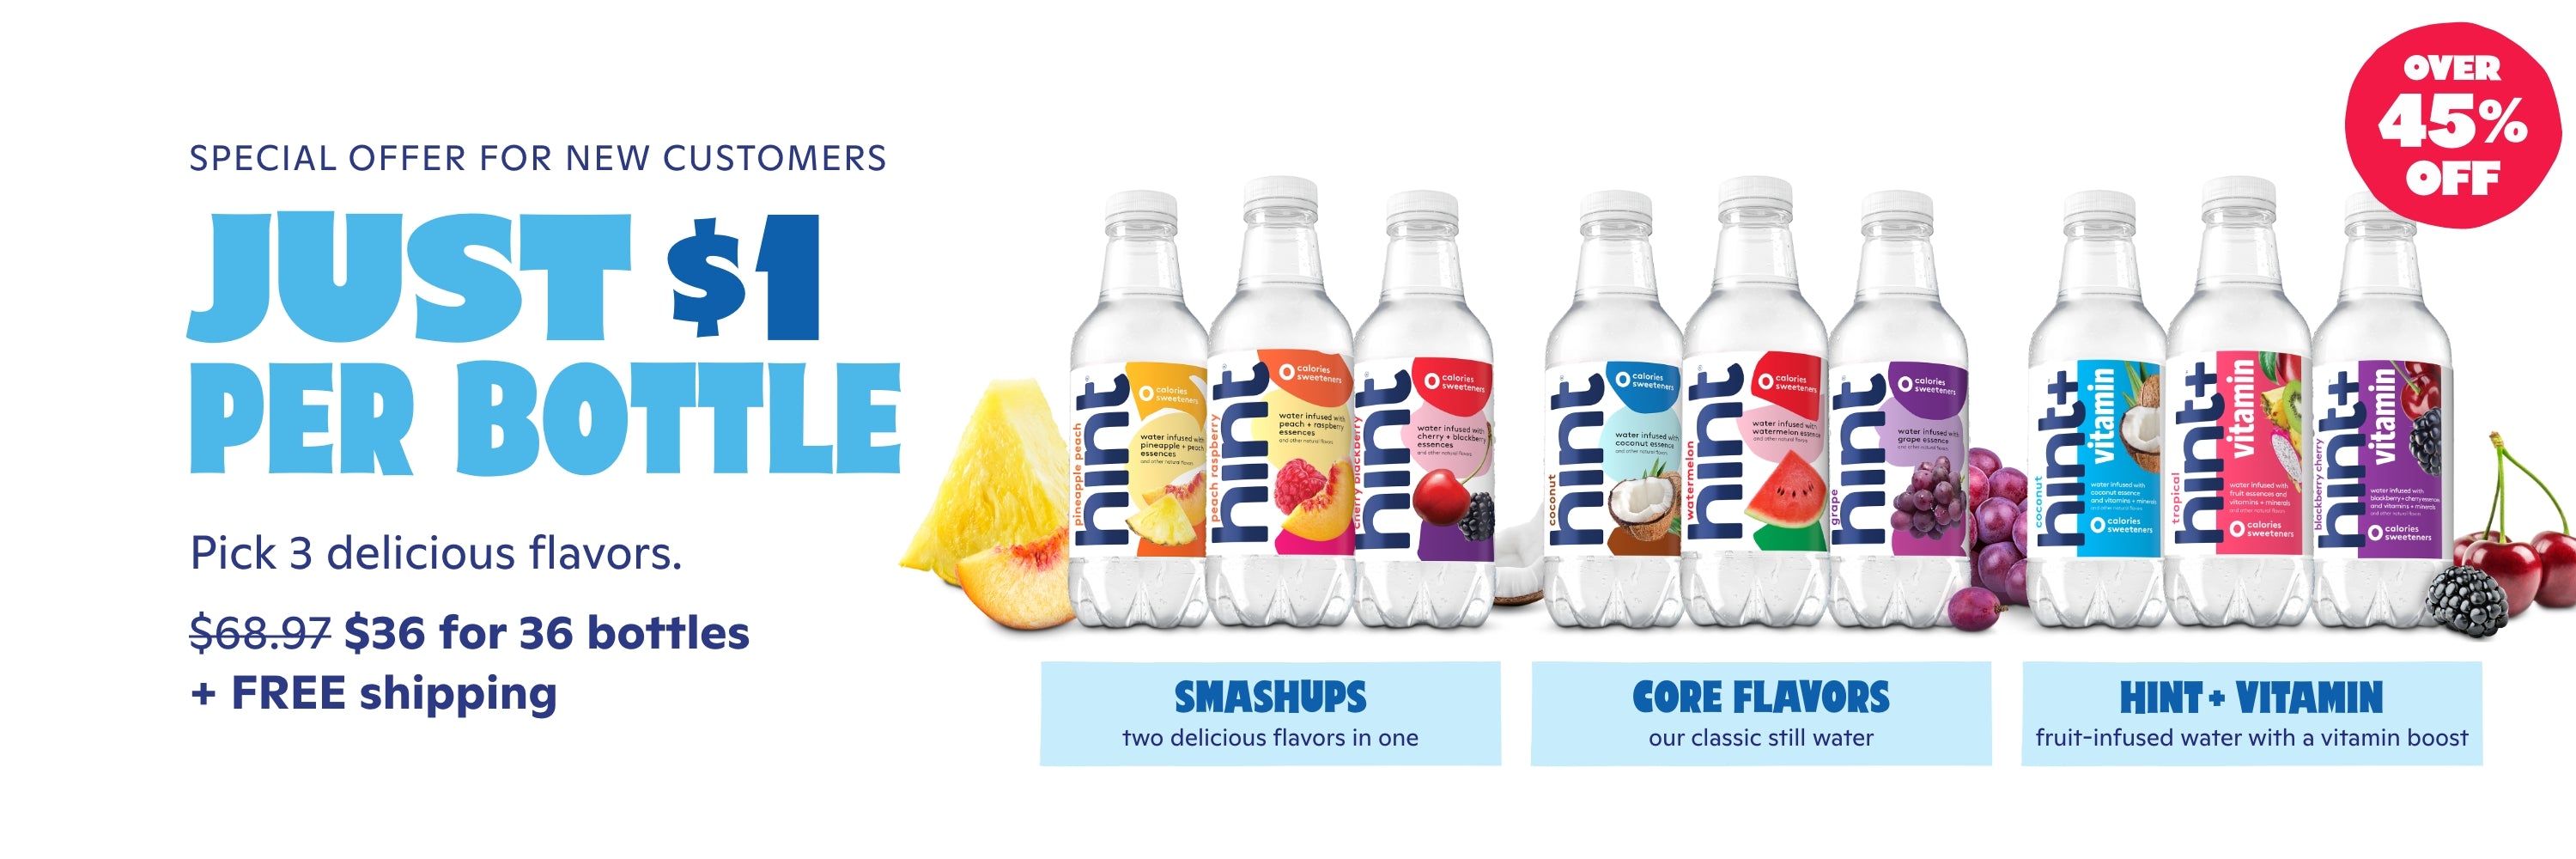 Mix & Match 3 cases 12 bottles per case. Enter promo code WATERUPGRADE at checkout.